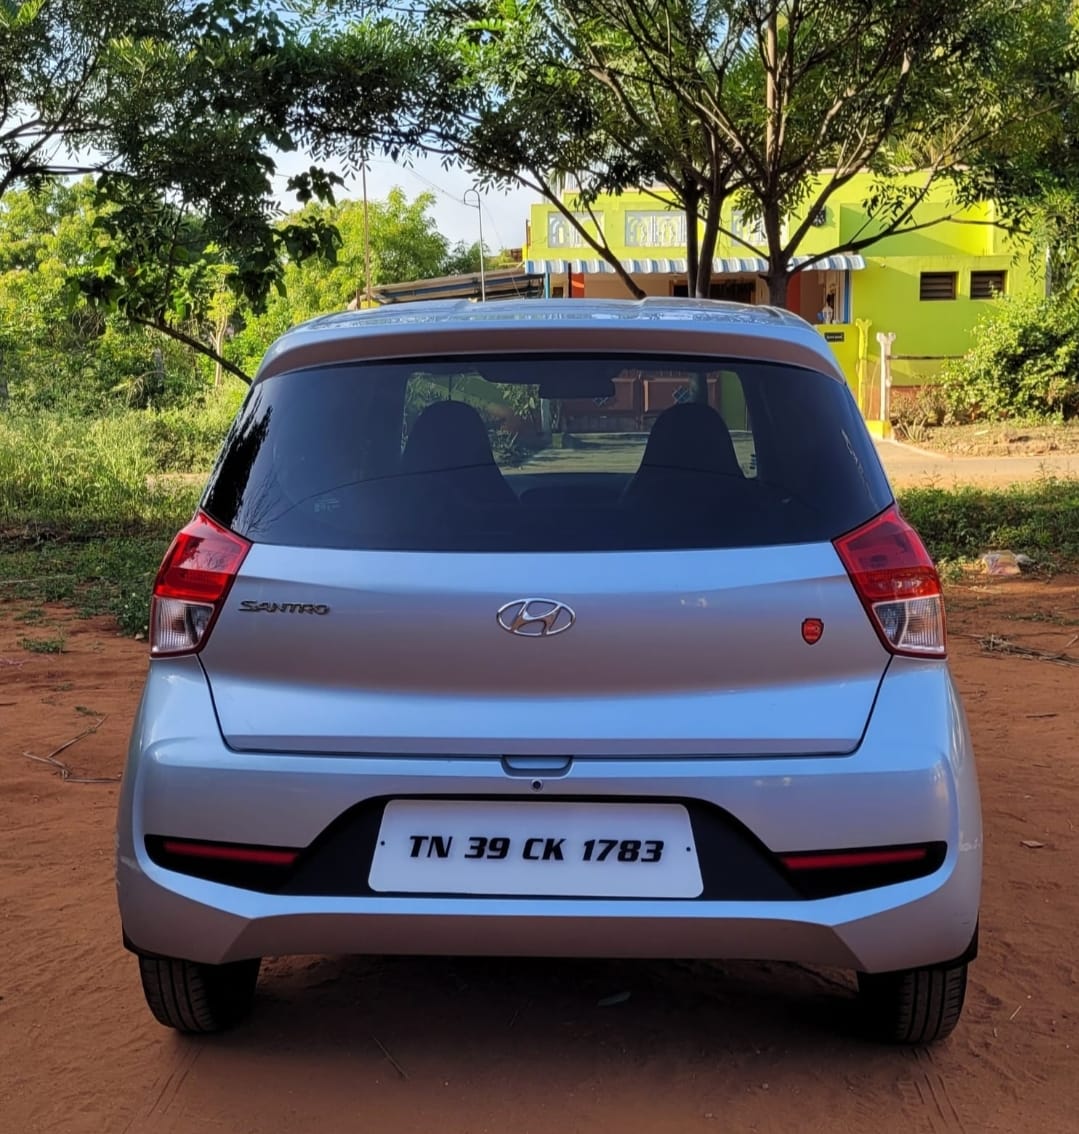 3985-for-sale-Hyundai-Santro-Petrol-First-Owner-2019-TN-registered-rs-425000